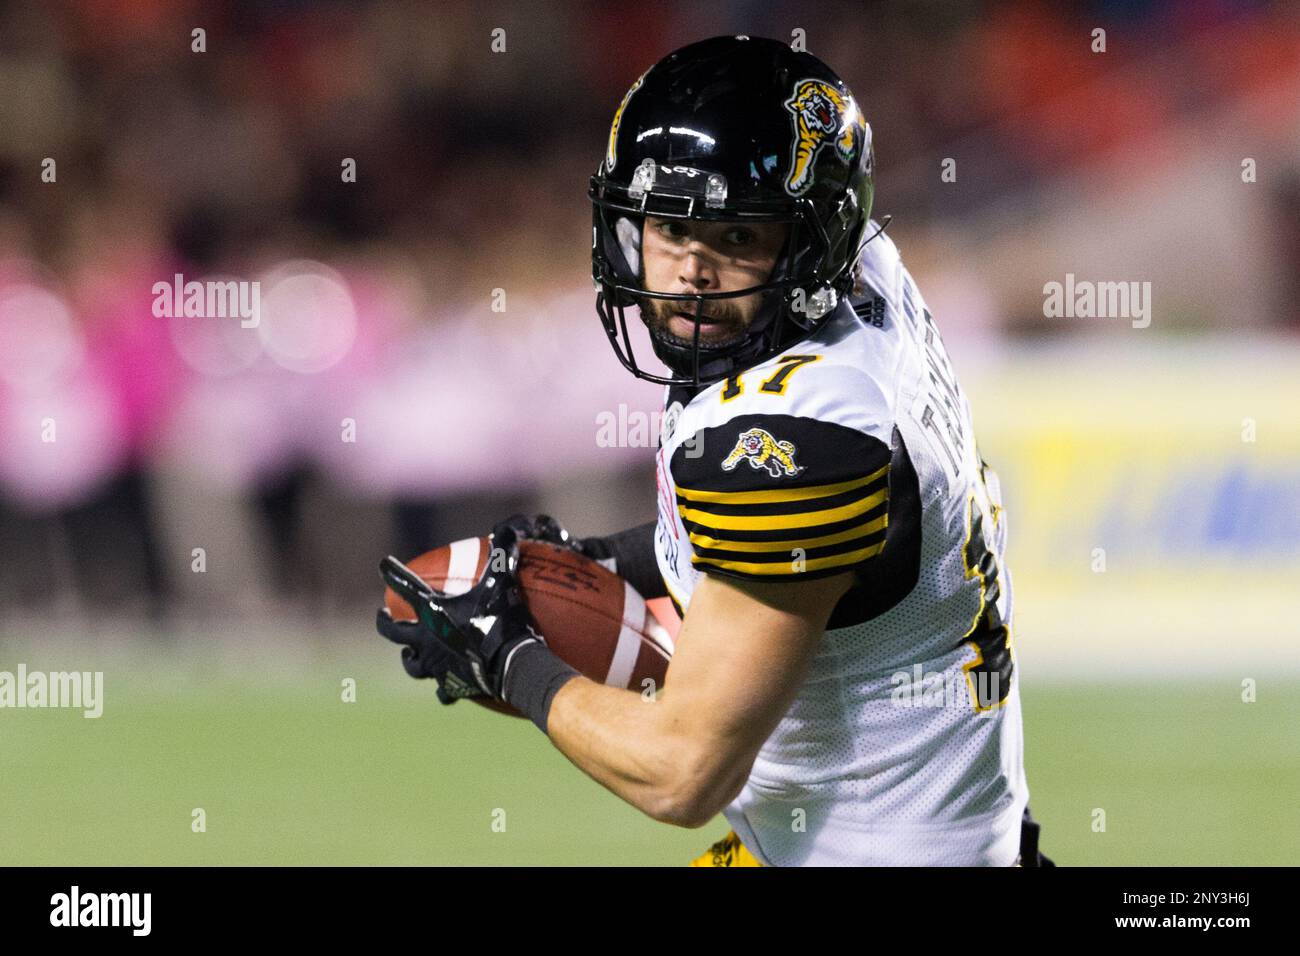 October 27, 2017: Hamilton Tiger-Cats wide receiver Luke Tasker (17) turns to run with the ball during the CFL game between Hamilton and Ottawa Redblacks at TD Place Stadium in Ottawa,